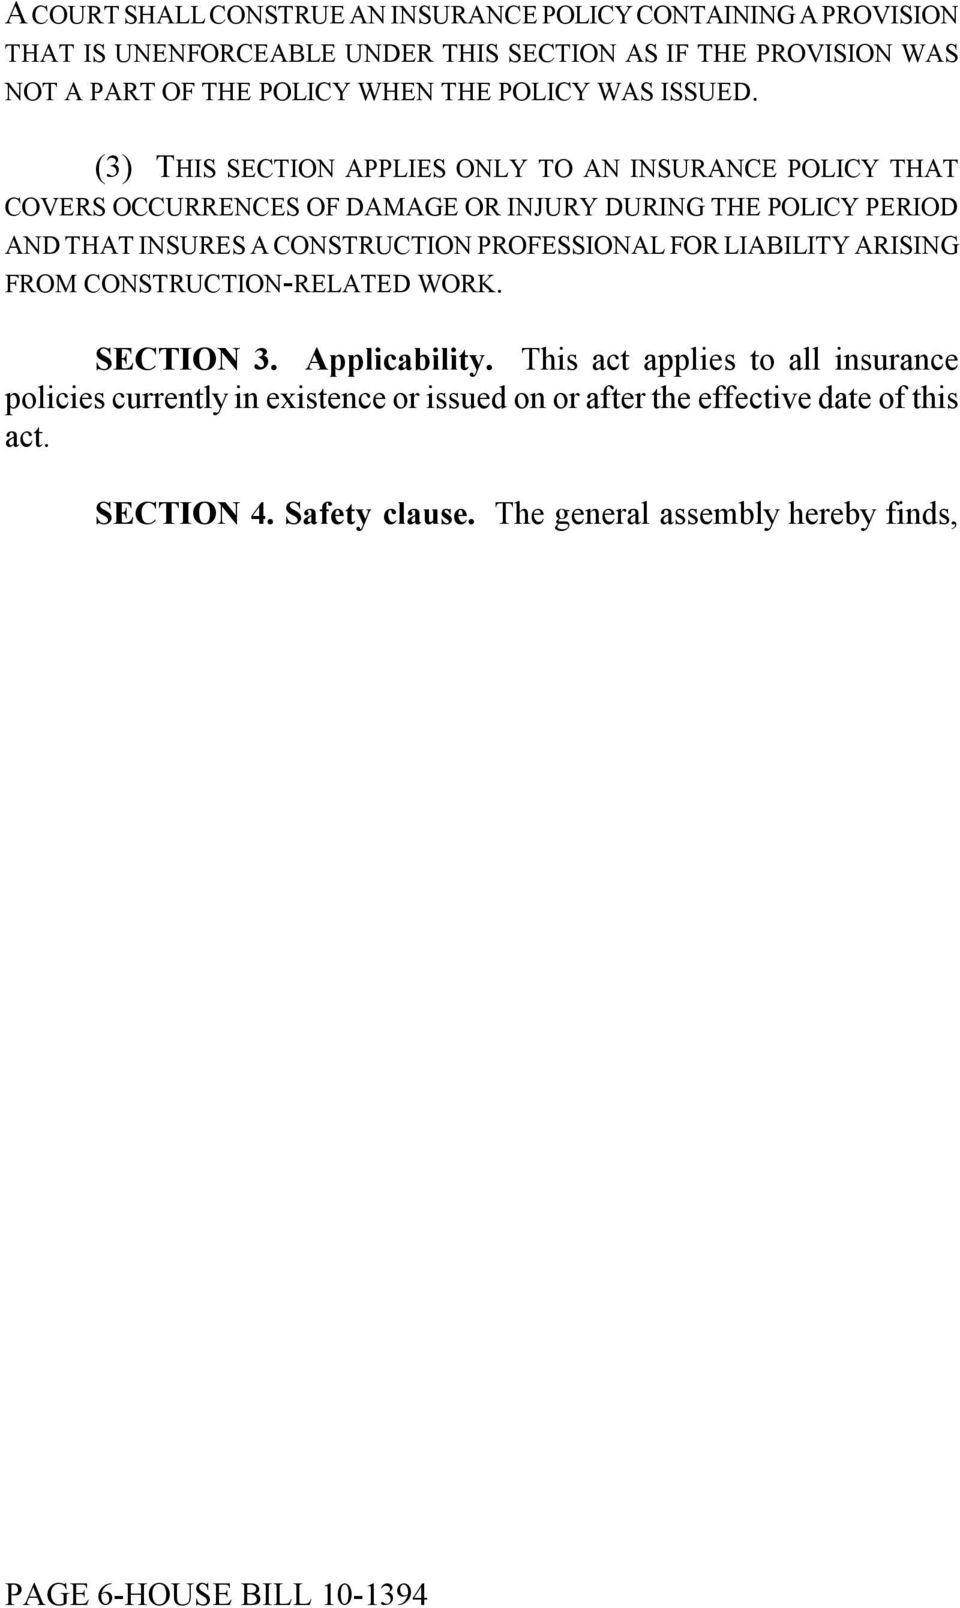 (3) THIS SECTION APPLIES ONLY TO AN INSURANCE POLICY THAT COVERS OCCURRENCES OF DAMAGE OR INJURY DURING THE POLICY PERIOD AND THAT INSURES A CONSTRUCTION